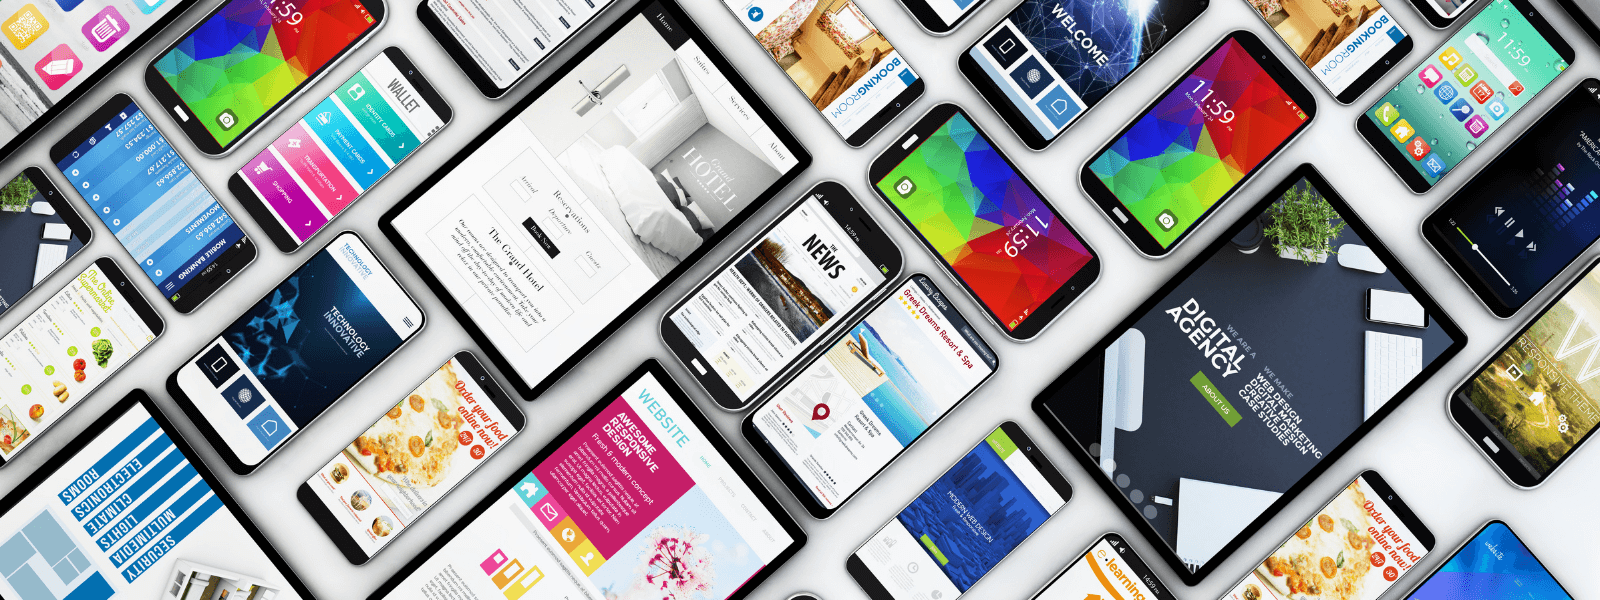 An image of a variety of phones and tablets laid out with various e-commerce websites on their screens